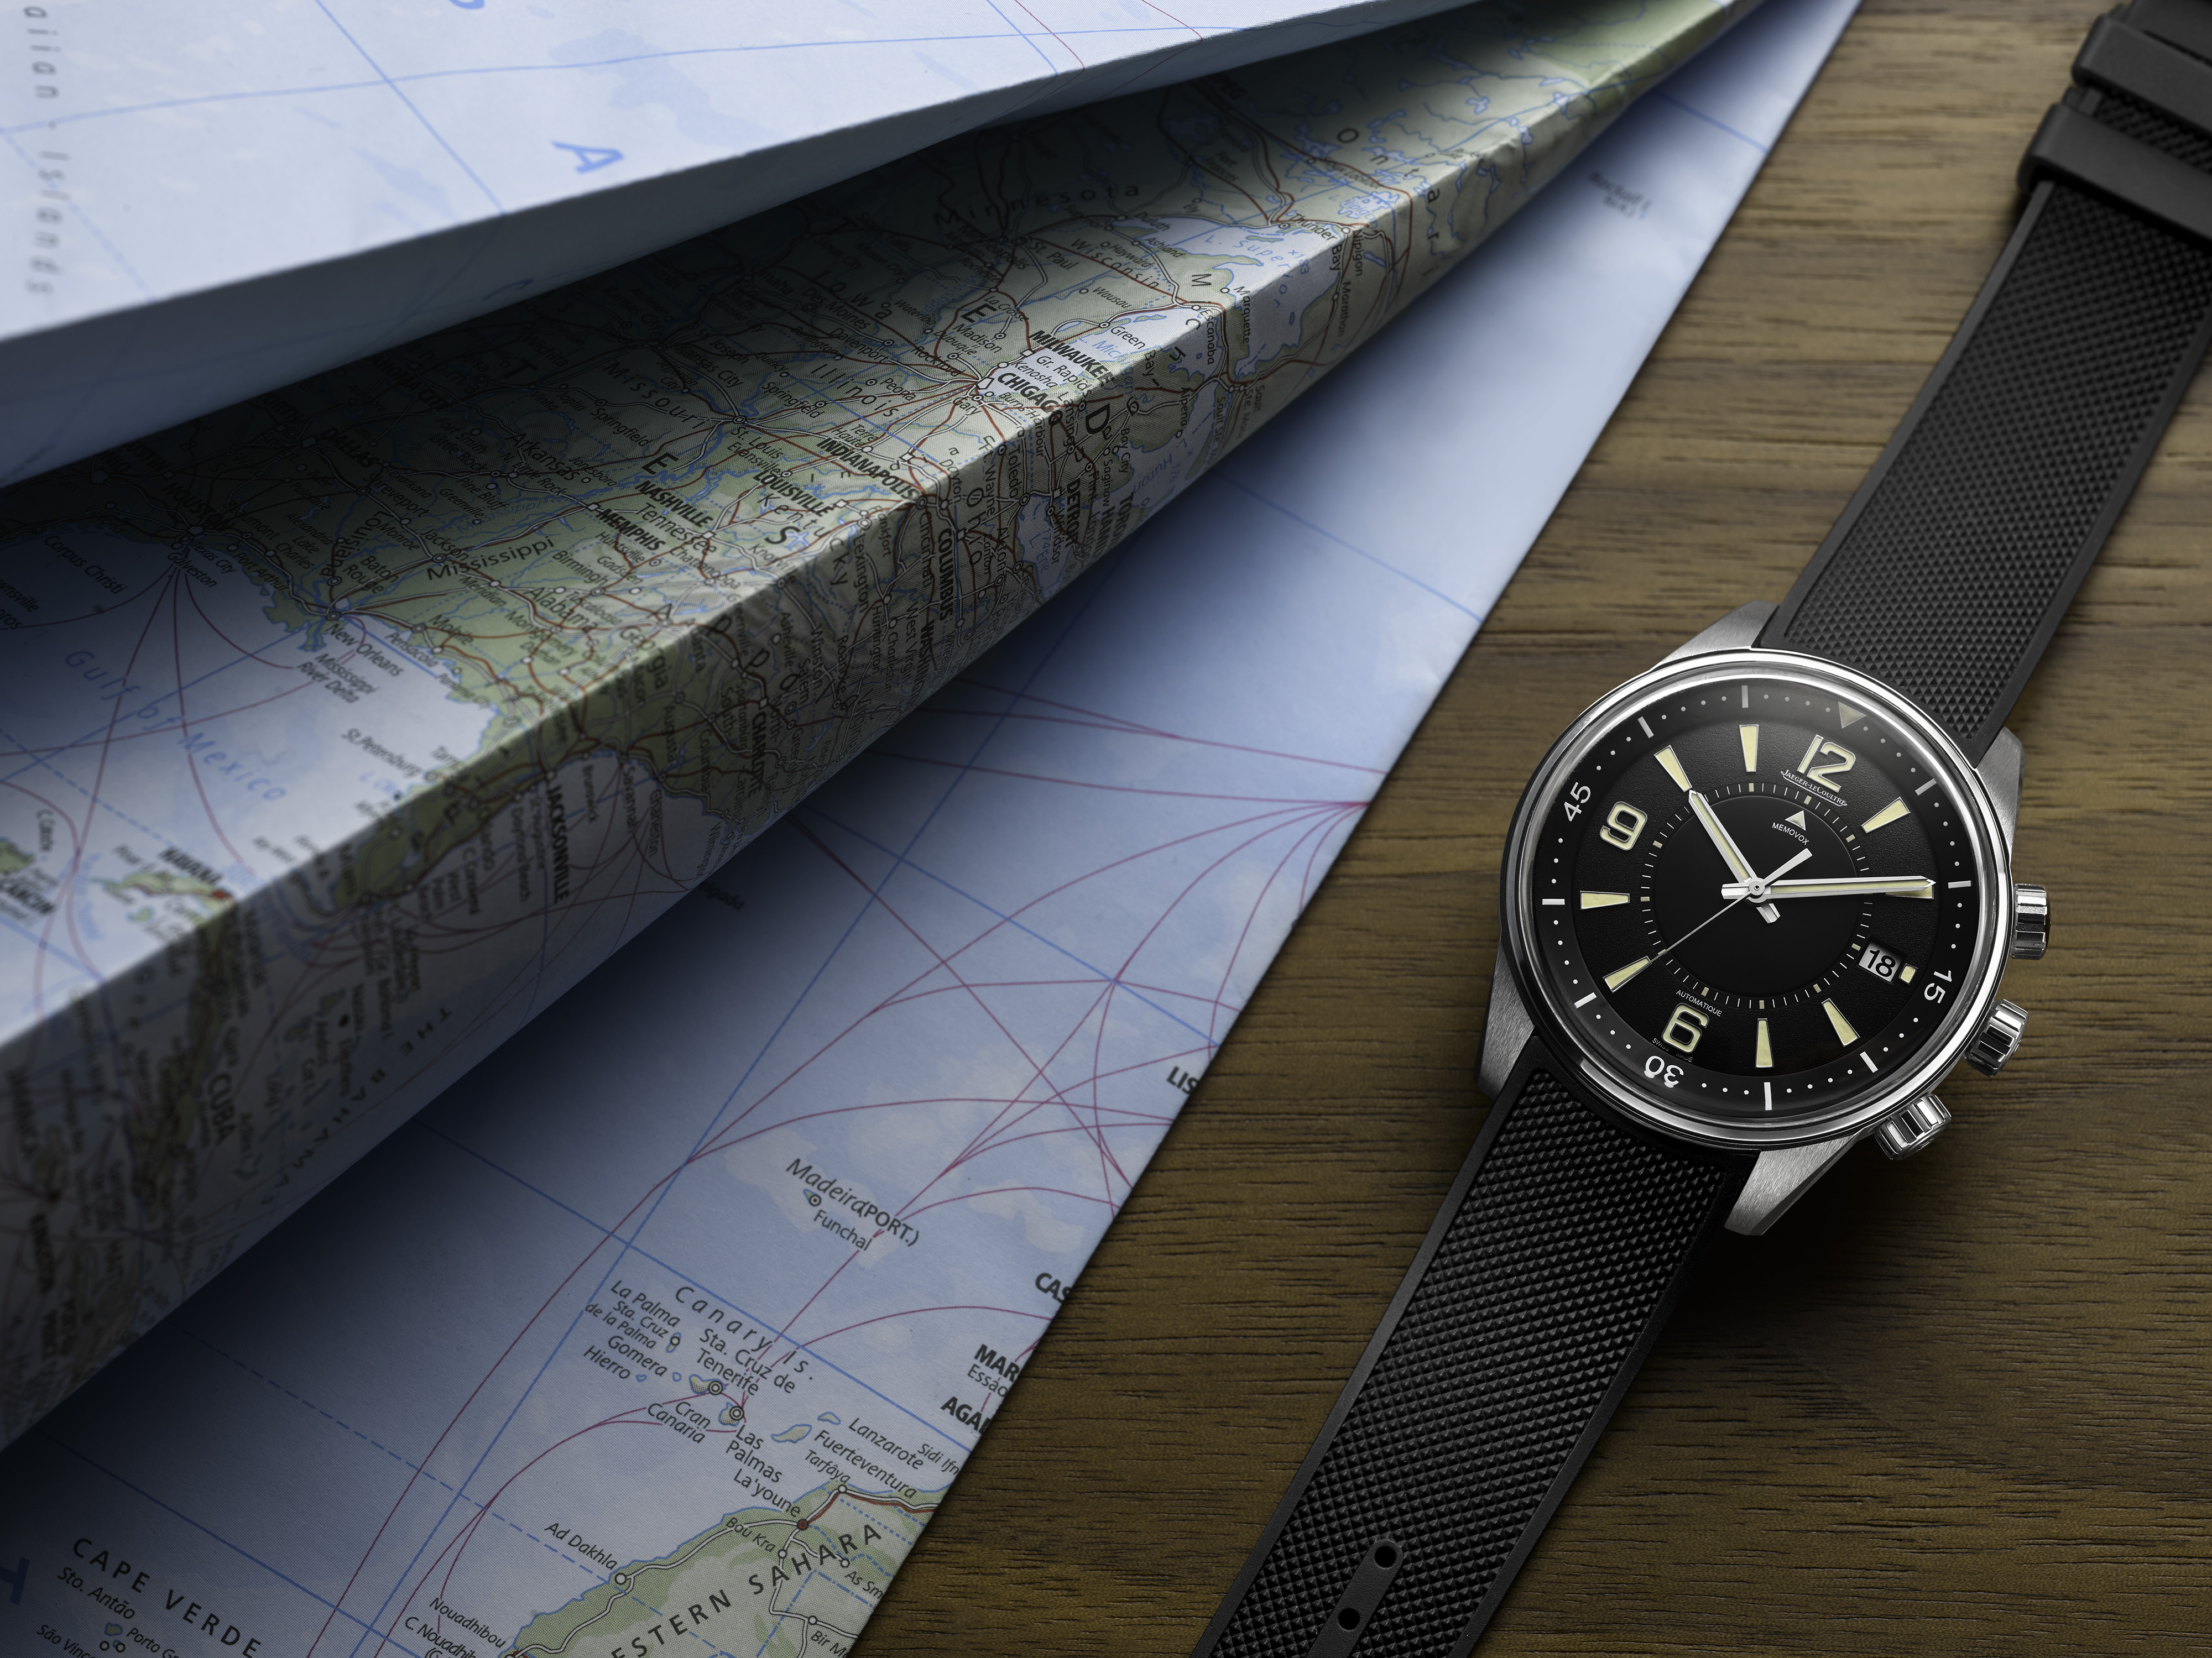 The new Jaeger-LeCoultre Polaris Memovox debuts in 2018.
Jaeger-LeCoultre takes a trip down memory lane with the legendary Memovox, through the Golden Age of modern watchmaking to the present day with updates that pay eloquent homage to the original.